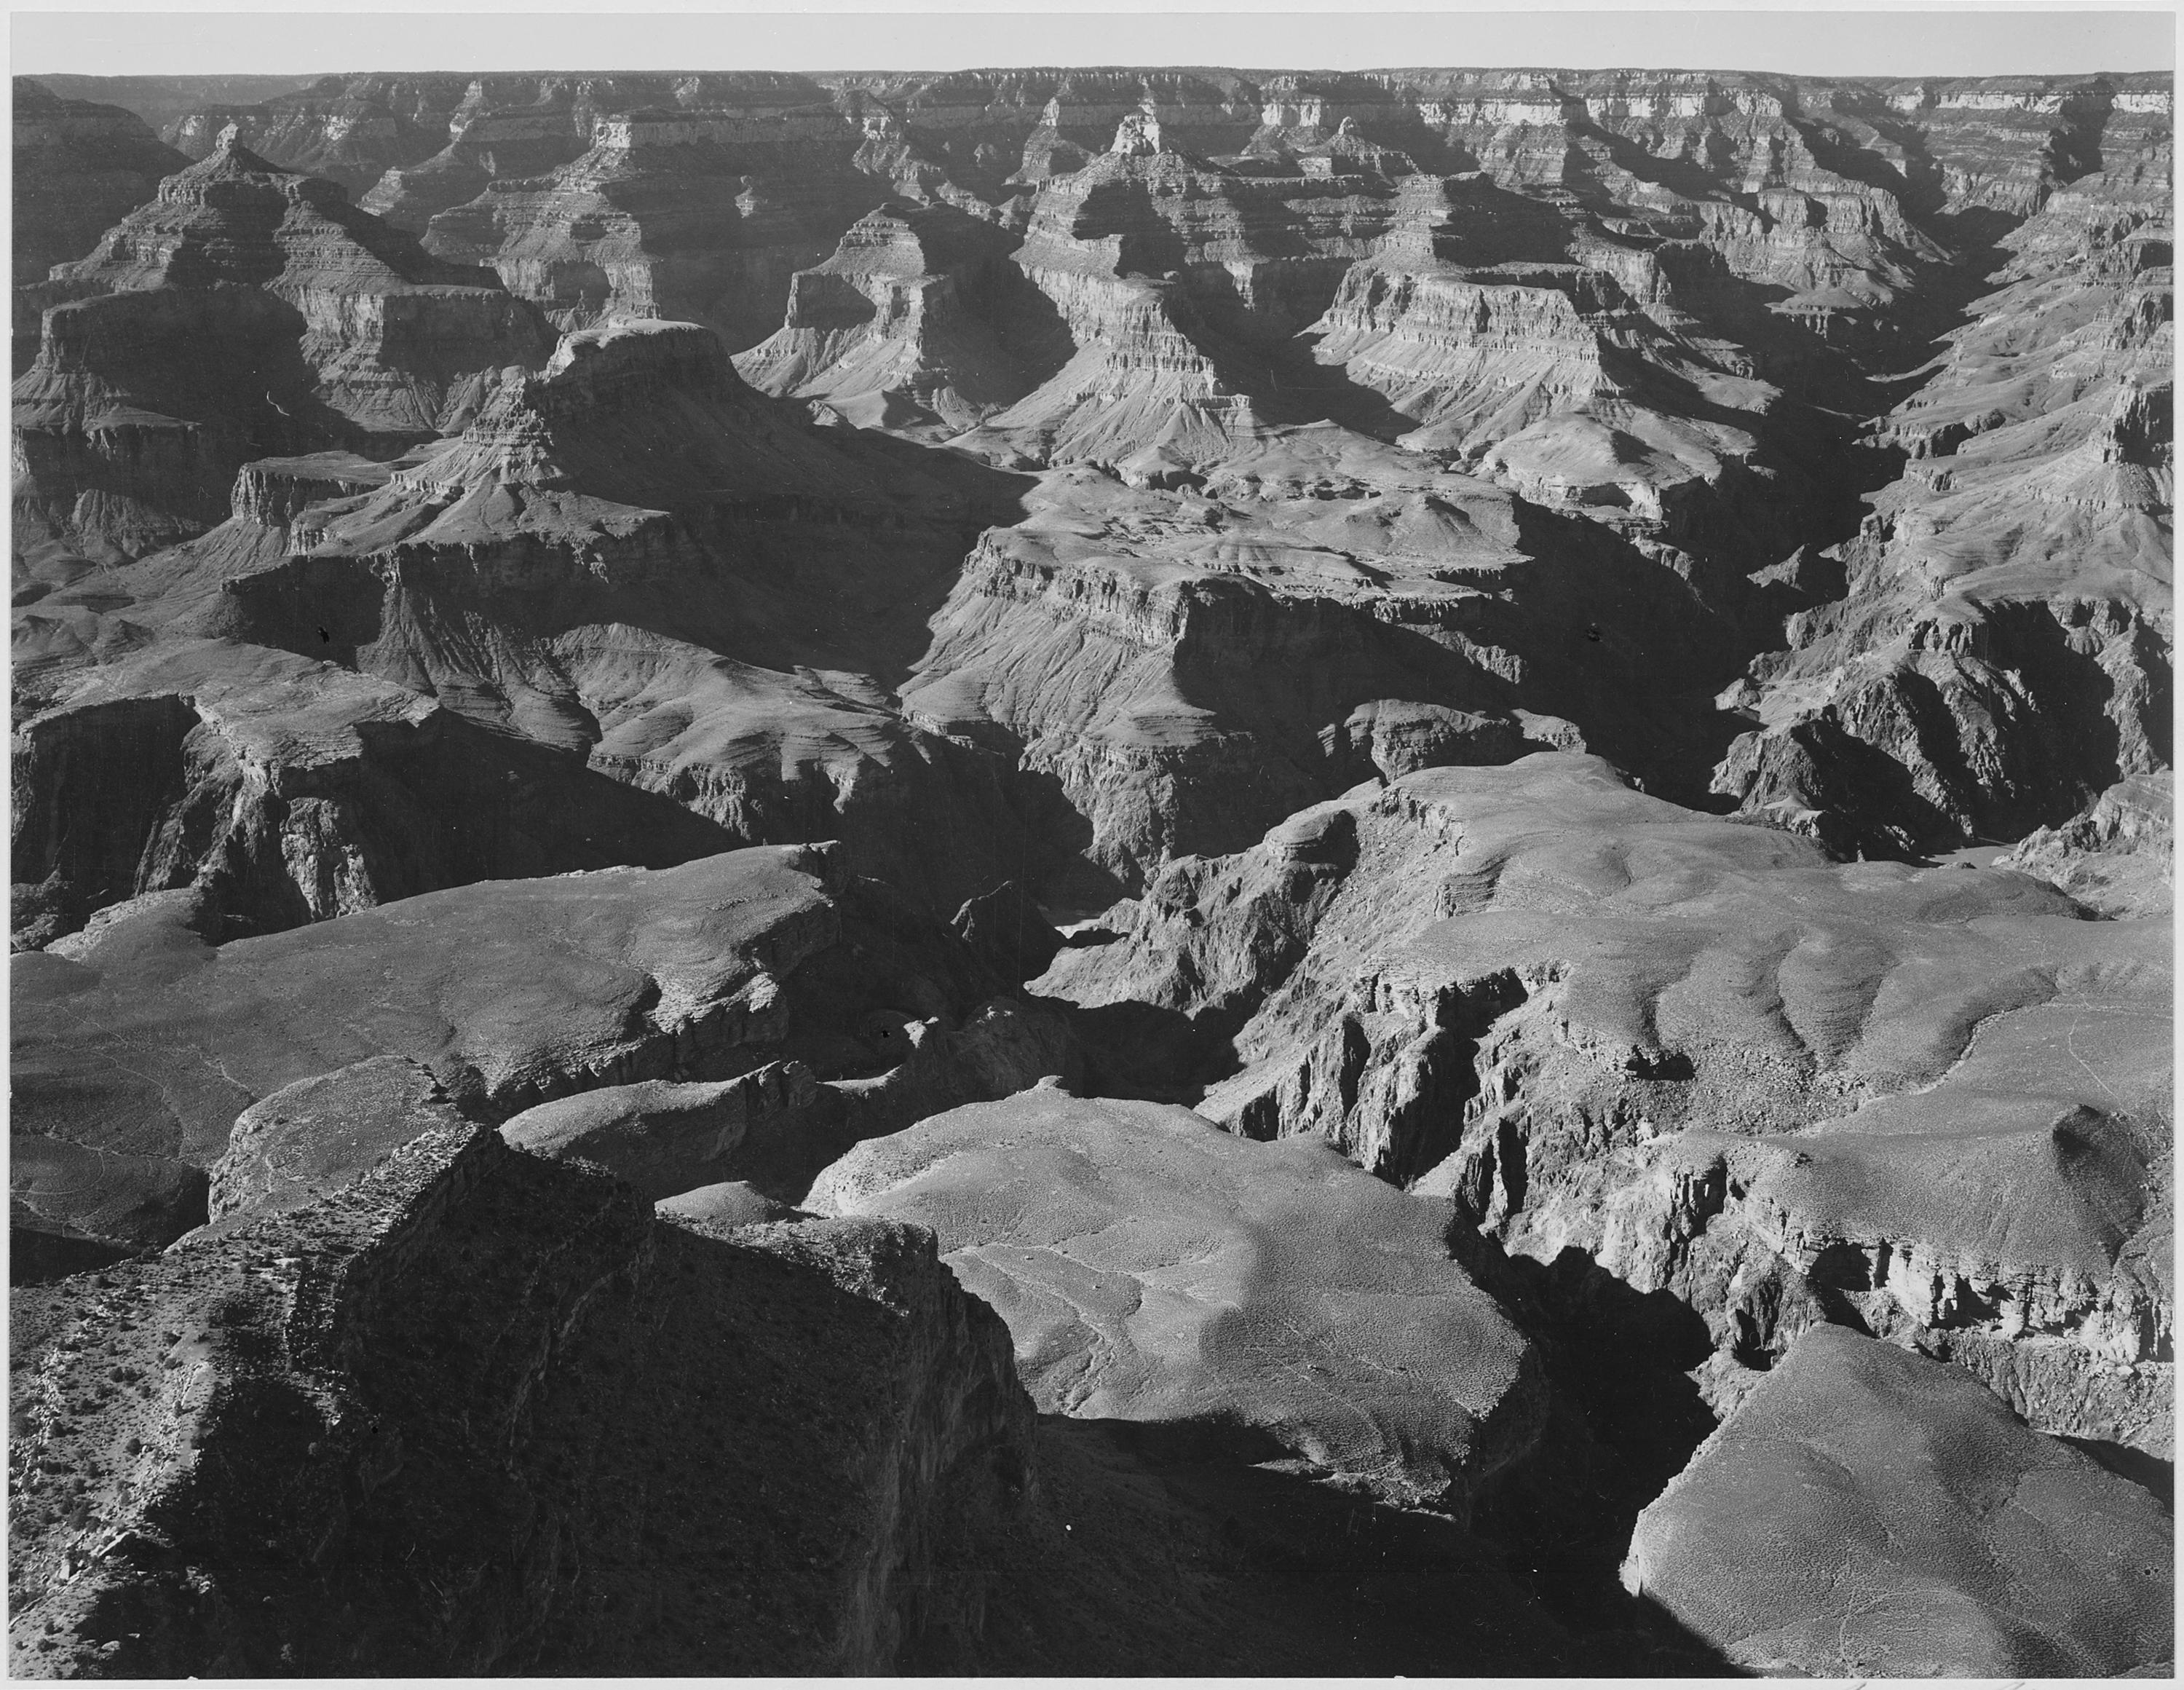 Ansel Adams - National Archives 79-AA-F18